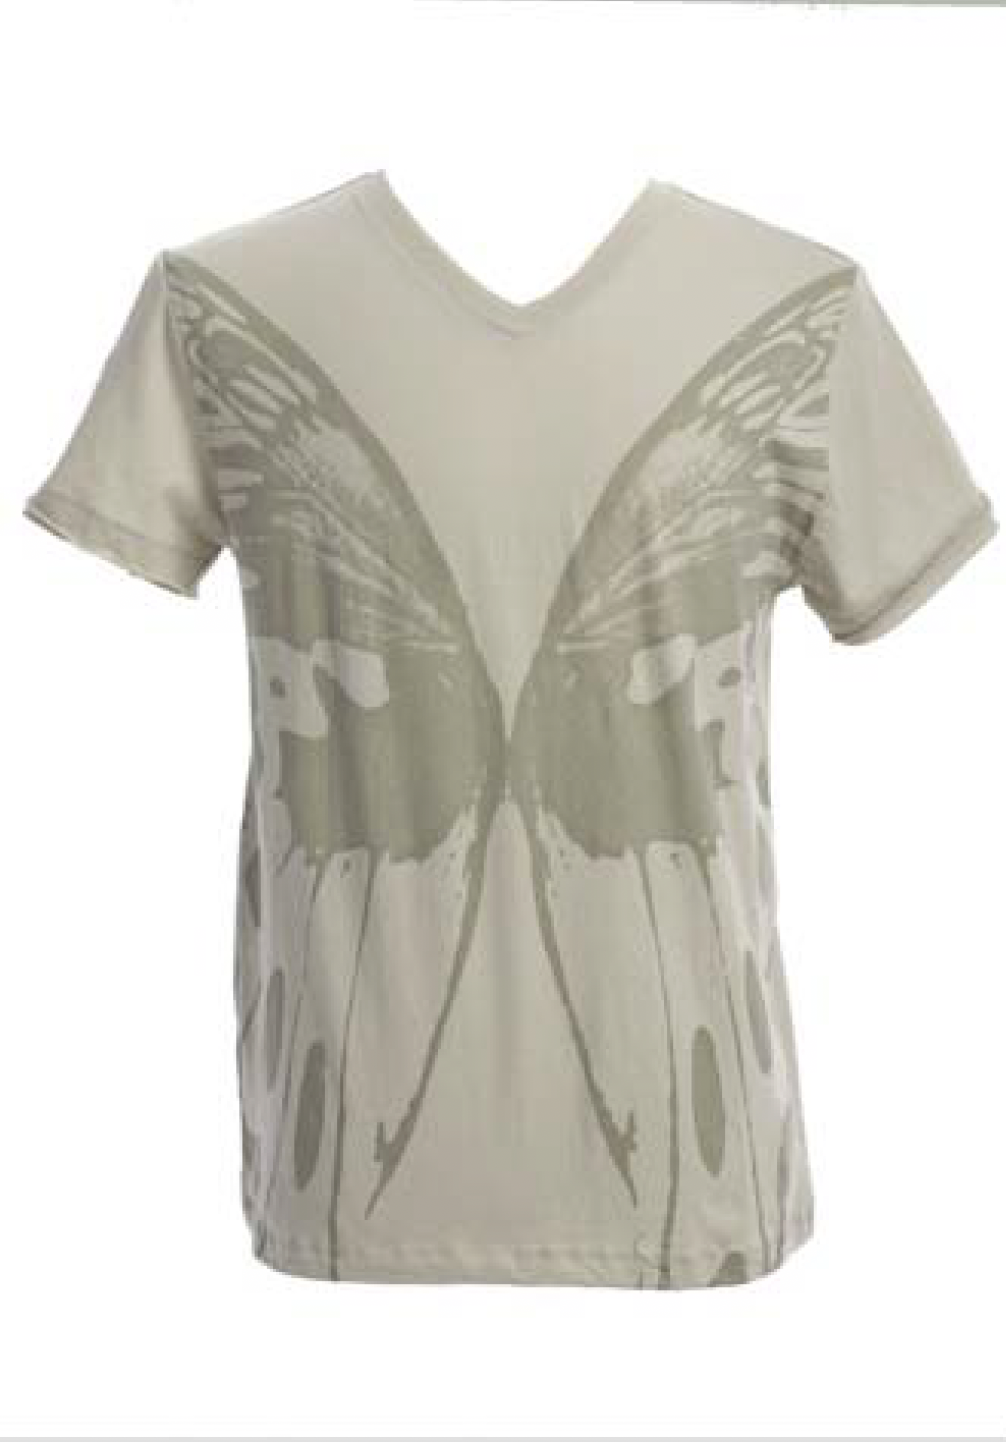 Itsus Vintage Men's T-Shirt "Wings" in Water Fall (2009 Collection) - Email Us to Order